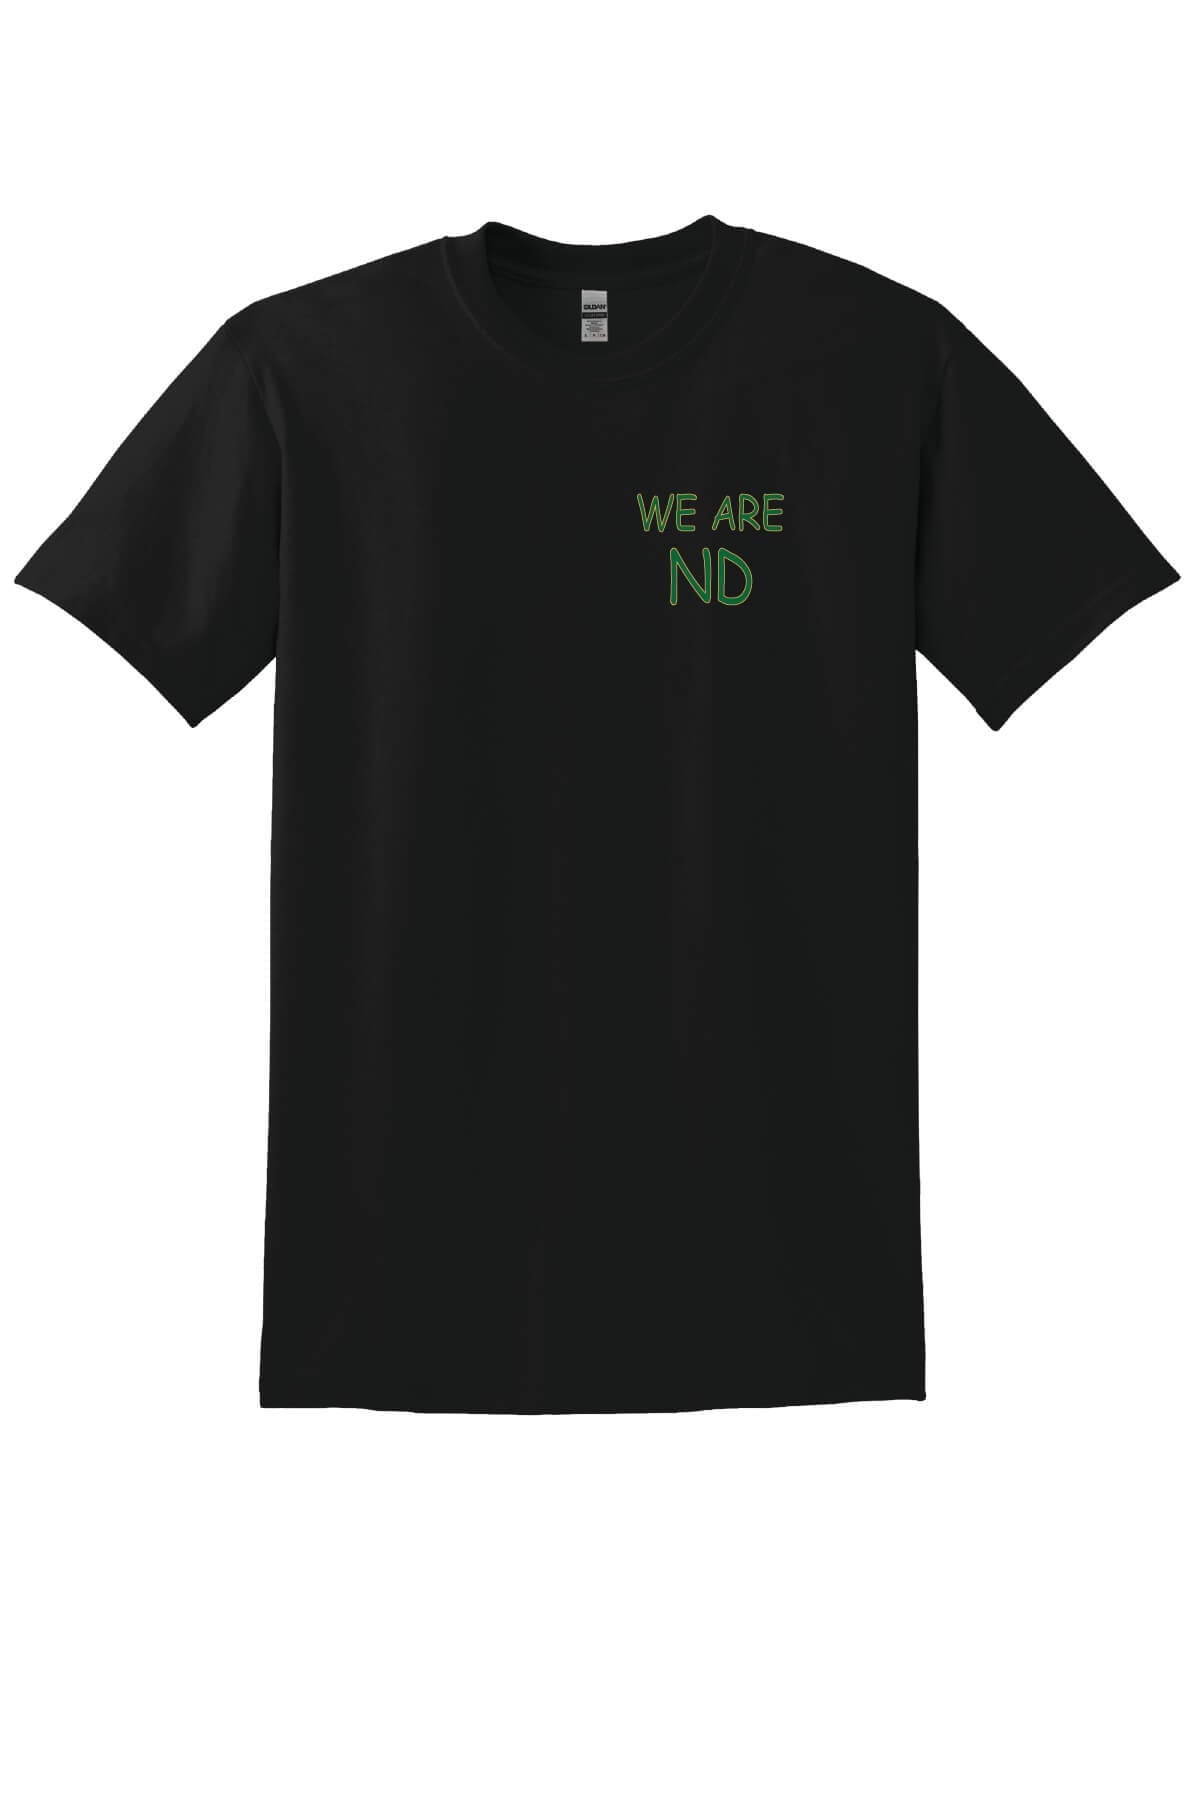 We Are ND Short Sleeve T-Shirt black